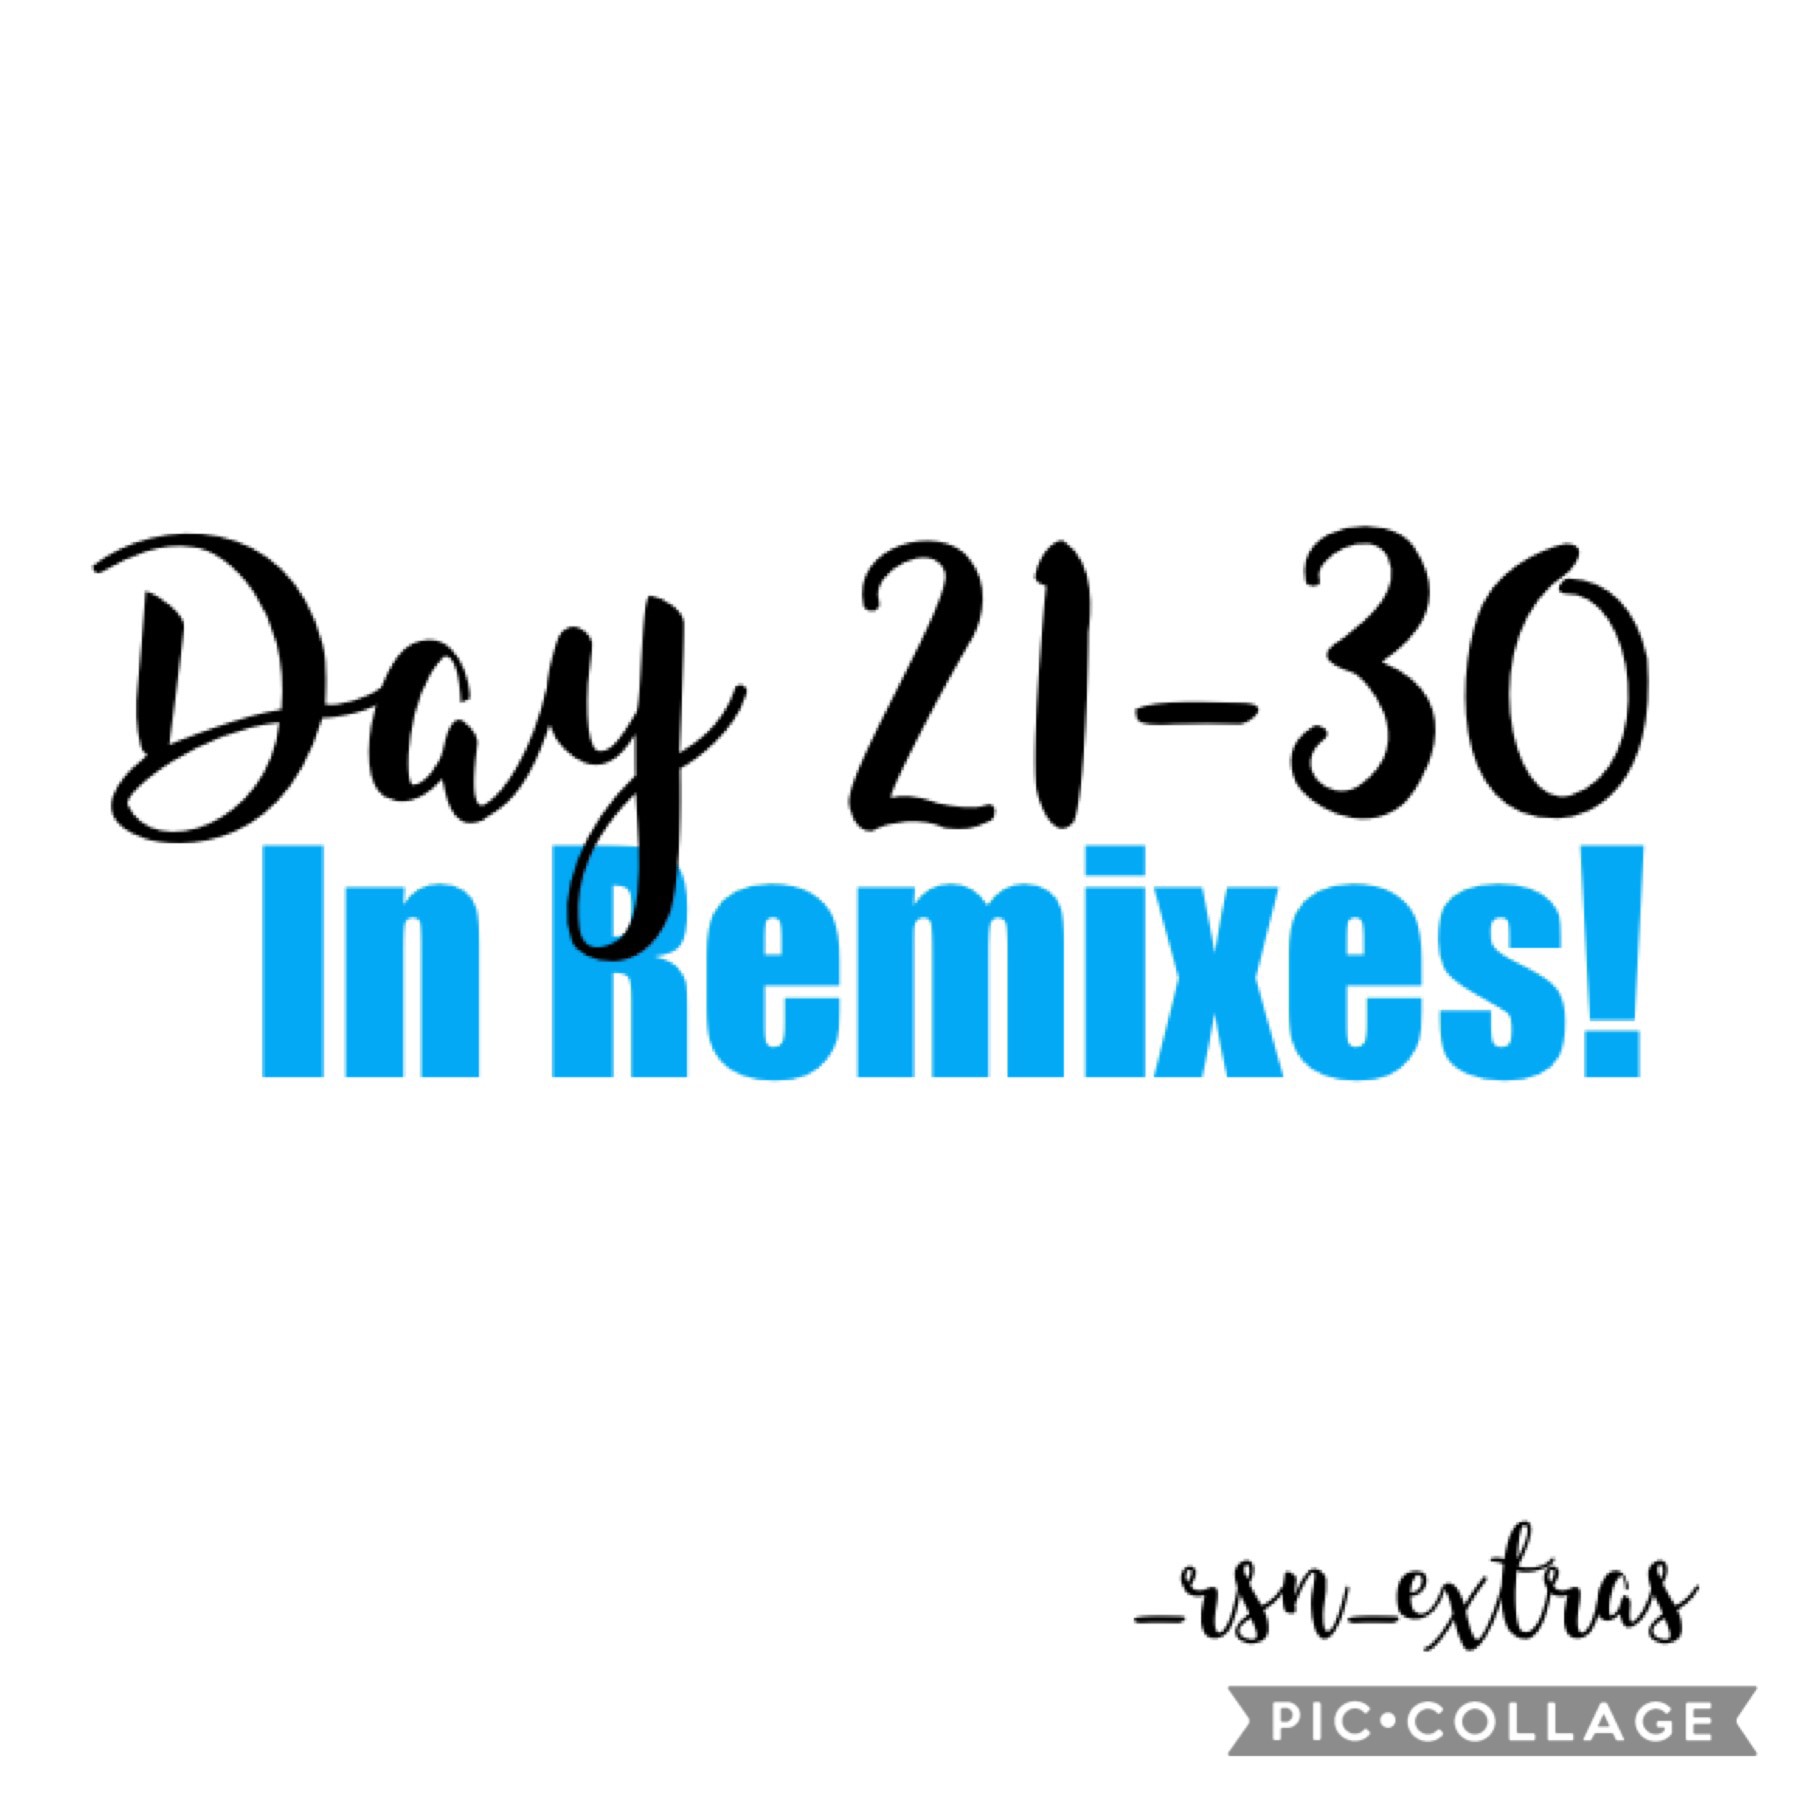 You’ll find day 21-30 in the remixes! 🚀
Comment 👩🏻‍✈️ for spam! 
💙💙💙